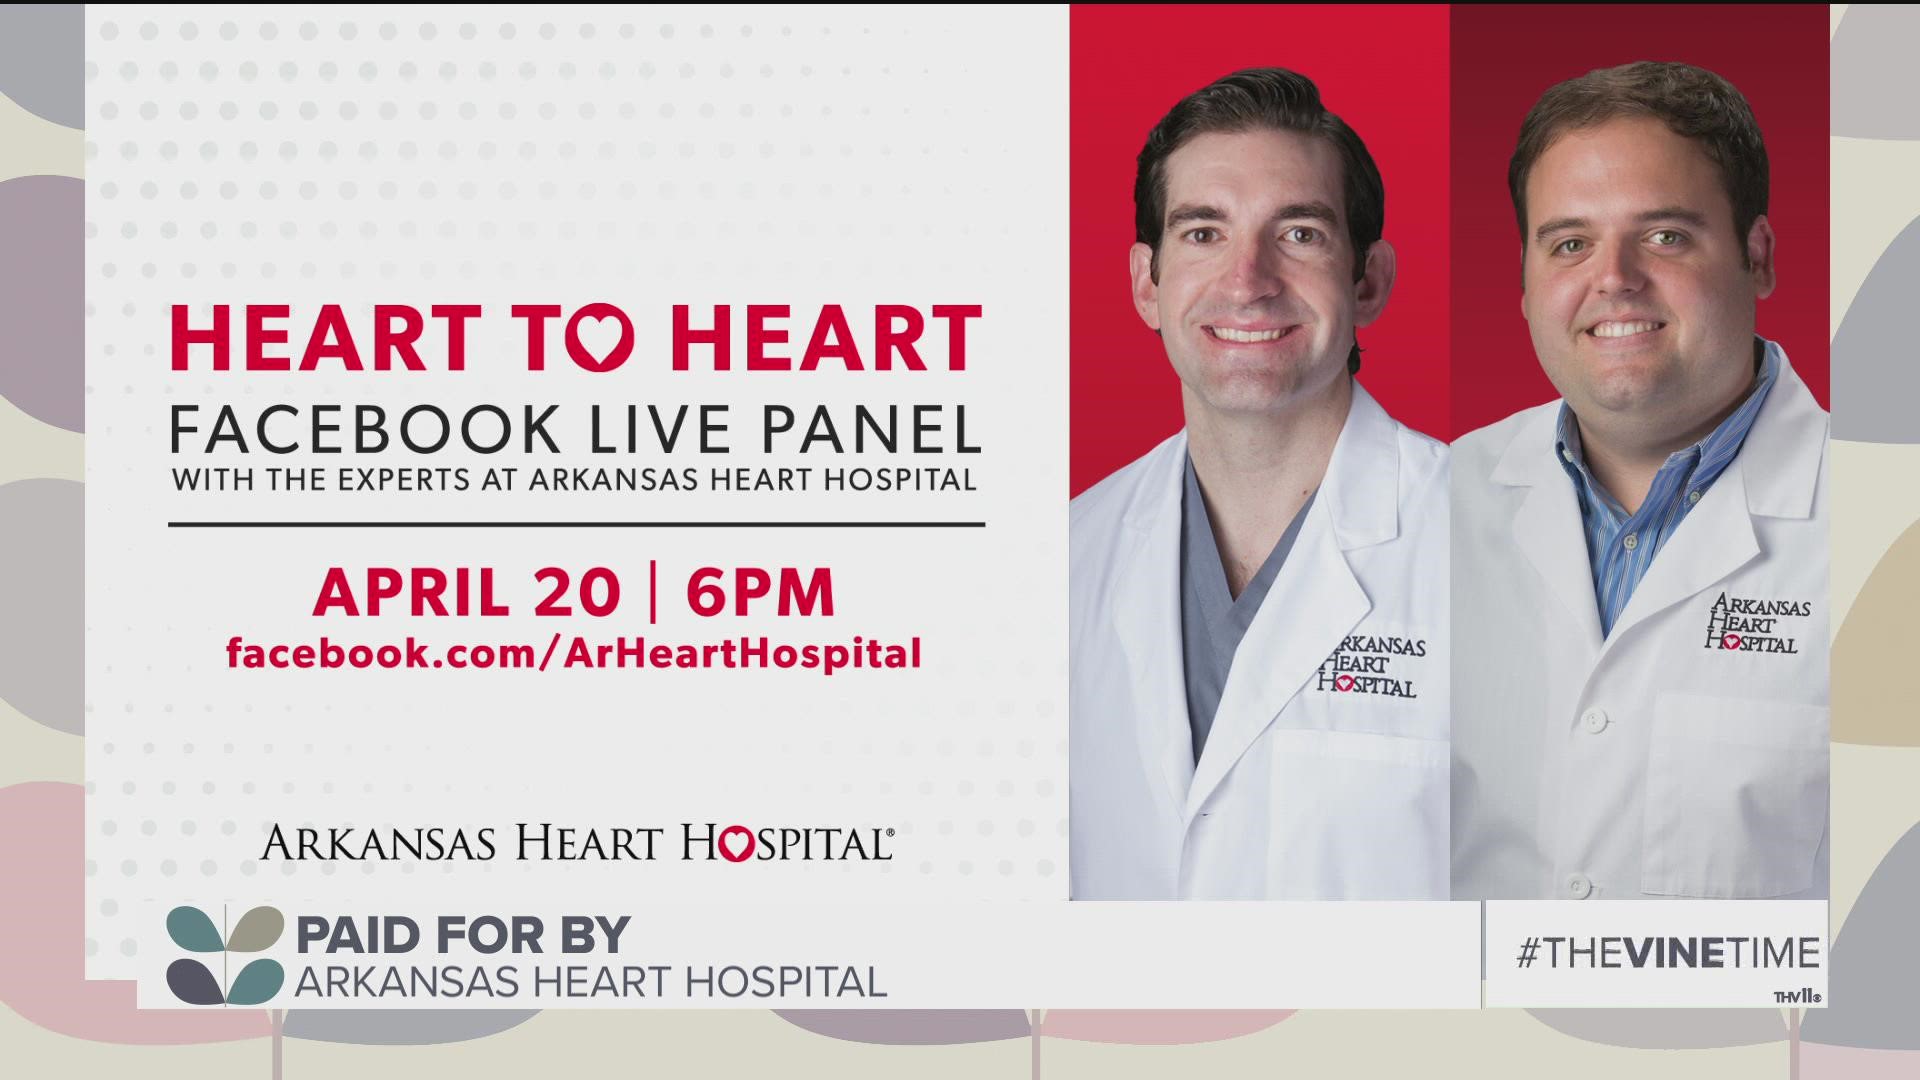 To learn more about cardiovascular problems following a COVID-19 diagnosis, tune in to their Facebook Live panel discussion on April 20 at 6 p.m.